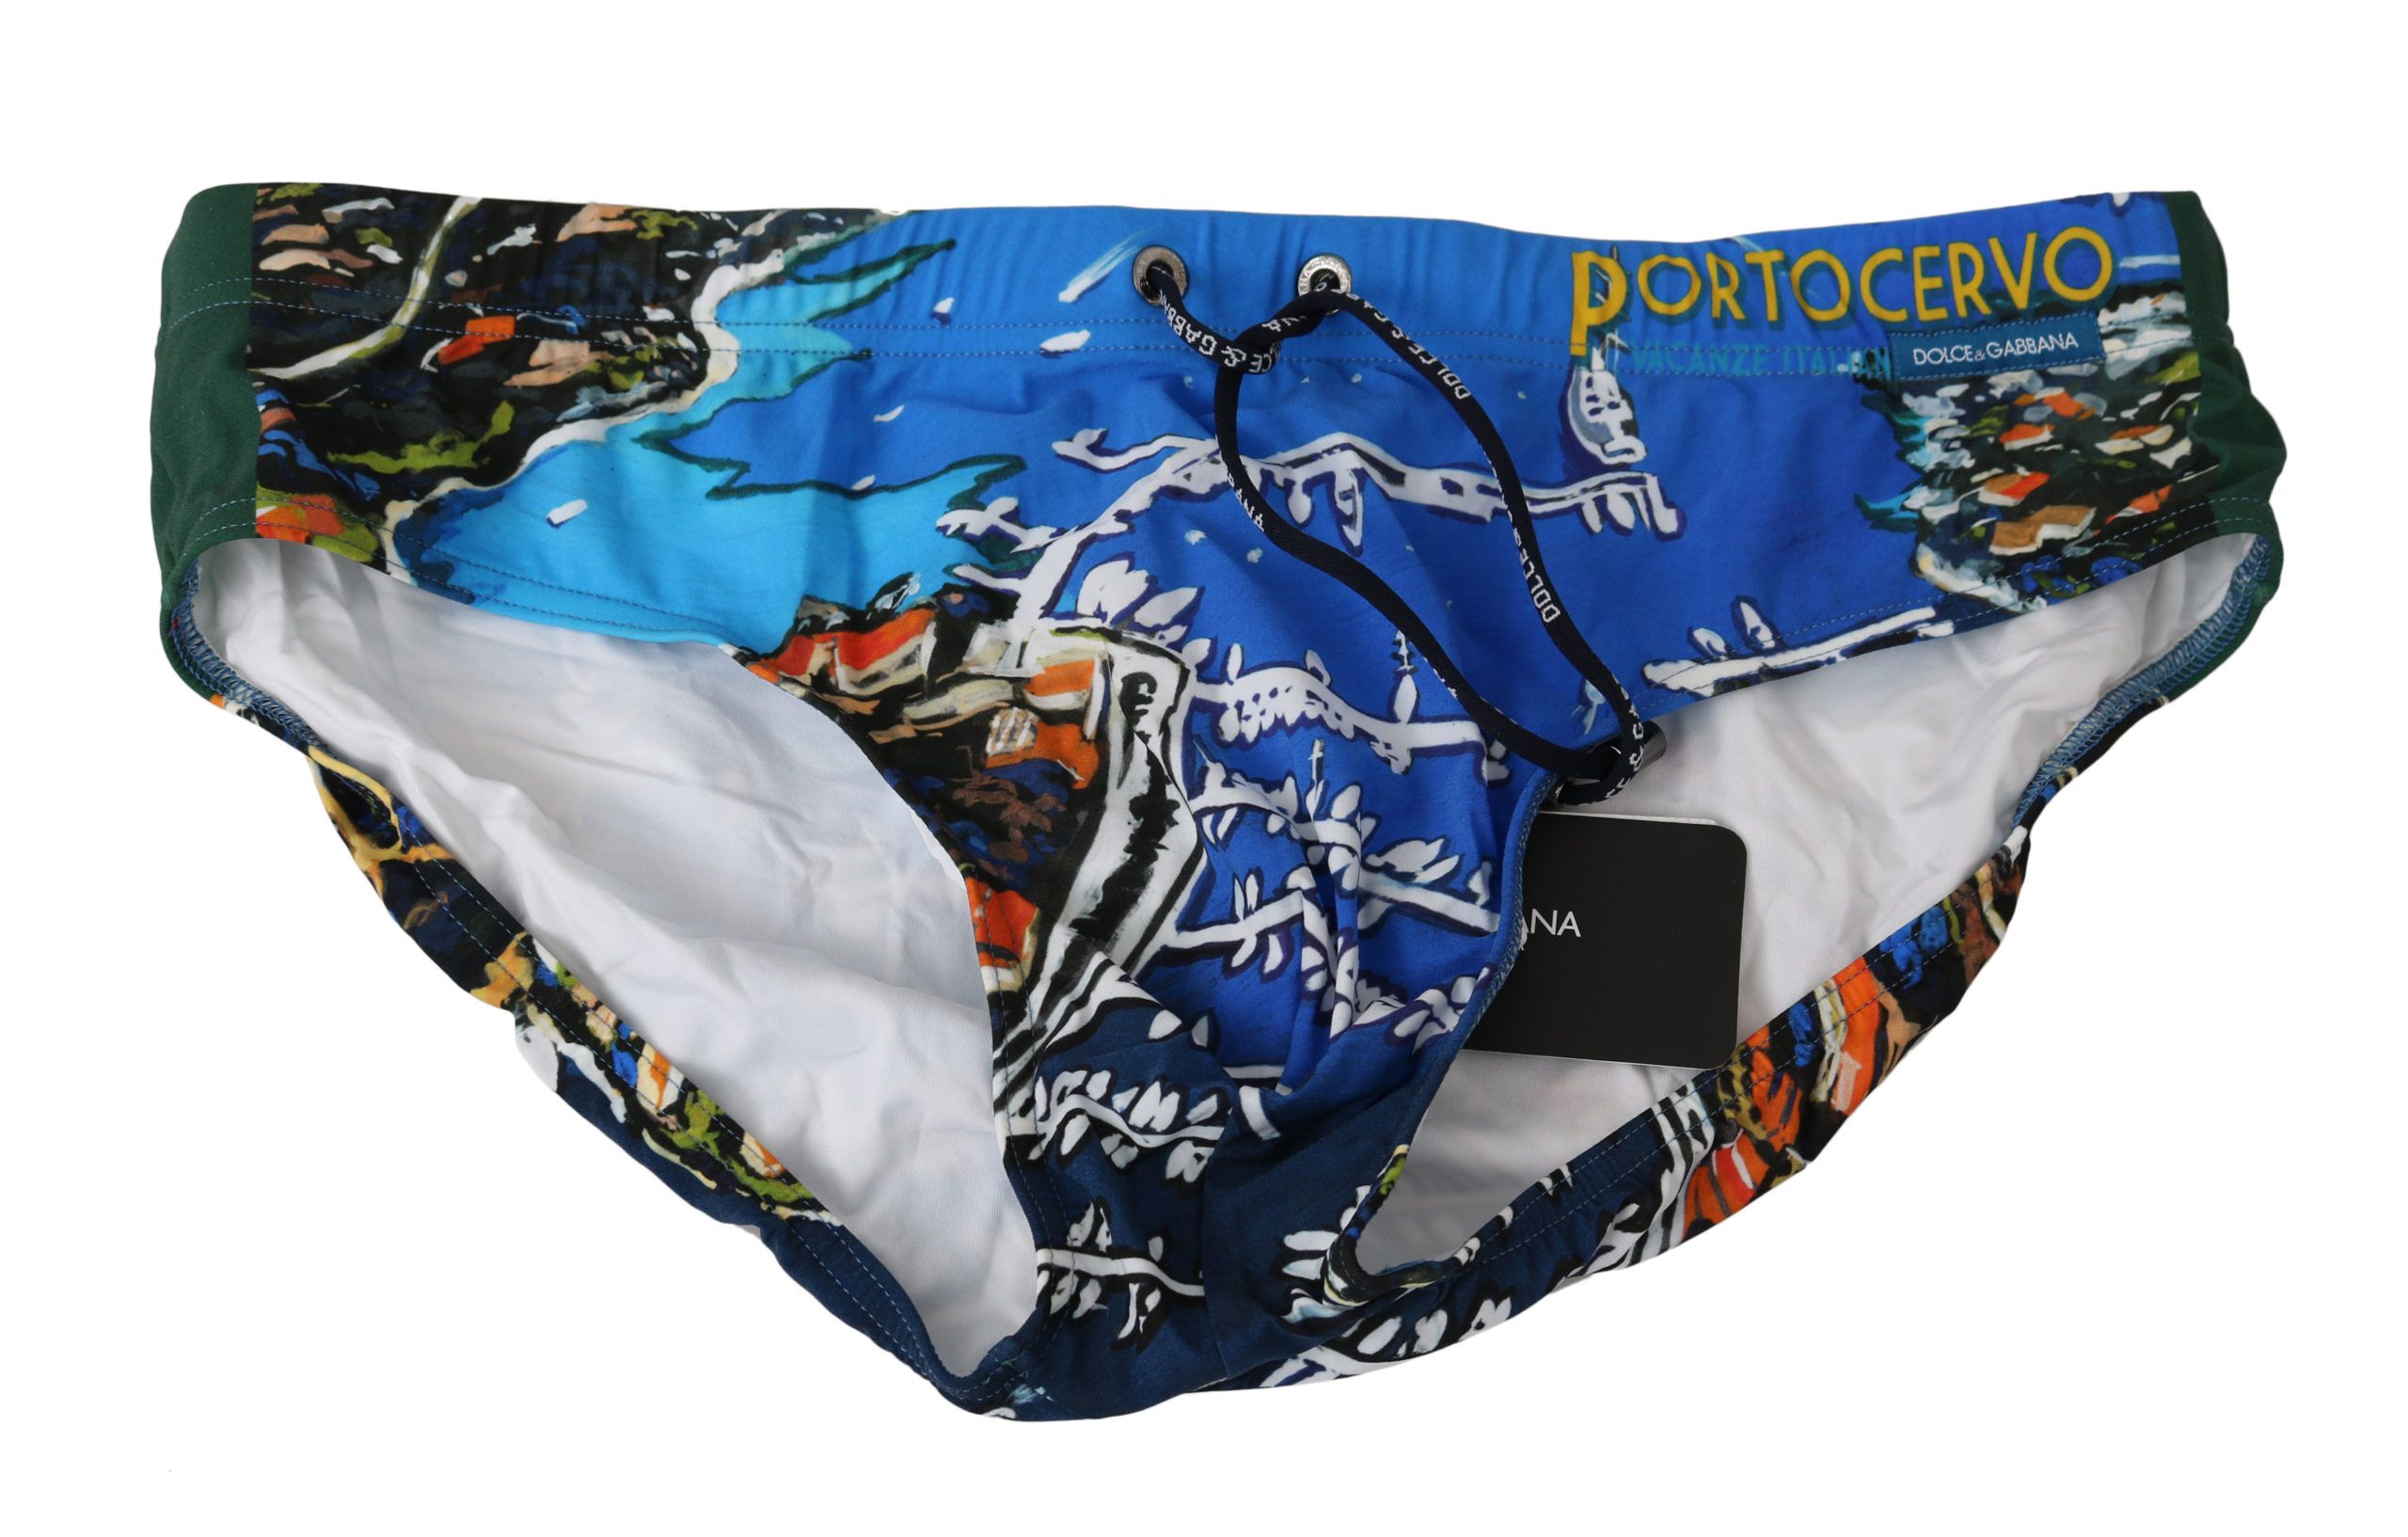 DOLCE & GABBANA
Absolutely stunning, 100% Authentic, brand new with tags Dolce & Gabbana Beachwear. 
Modell: Swim briefs beachwear
Color: Black with logo print
Material: 75% Nylon 25% Elastane
Waist strap
Logo details
Great fitting and comfort